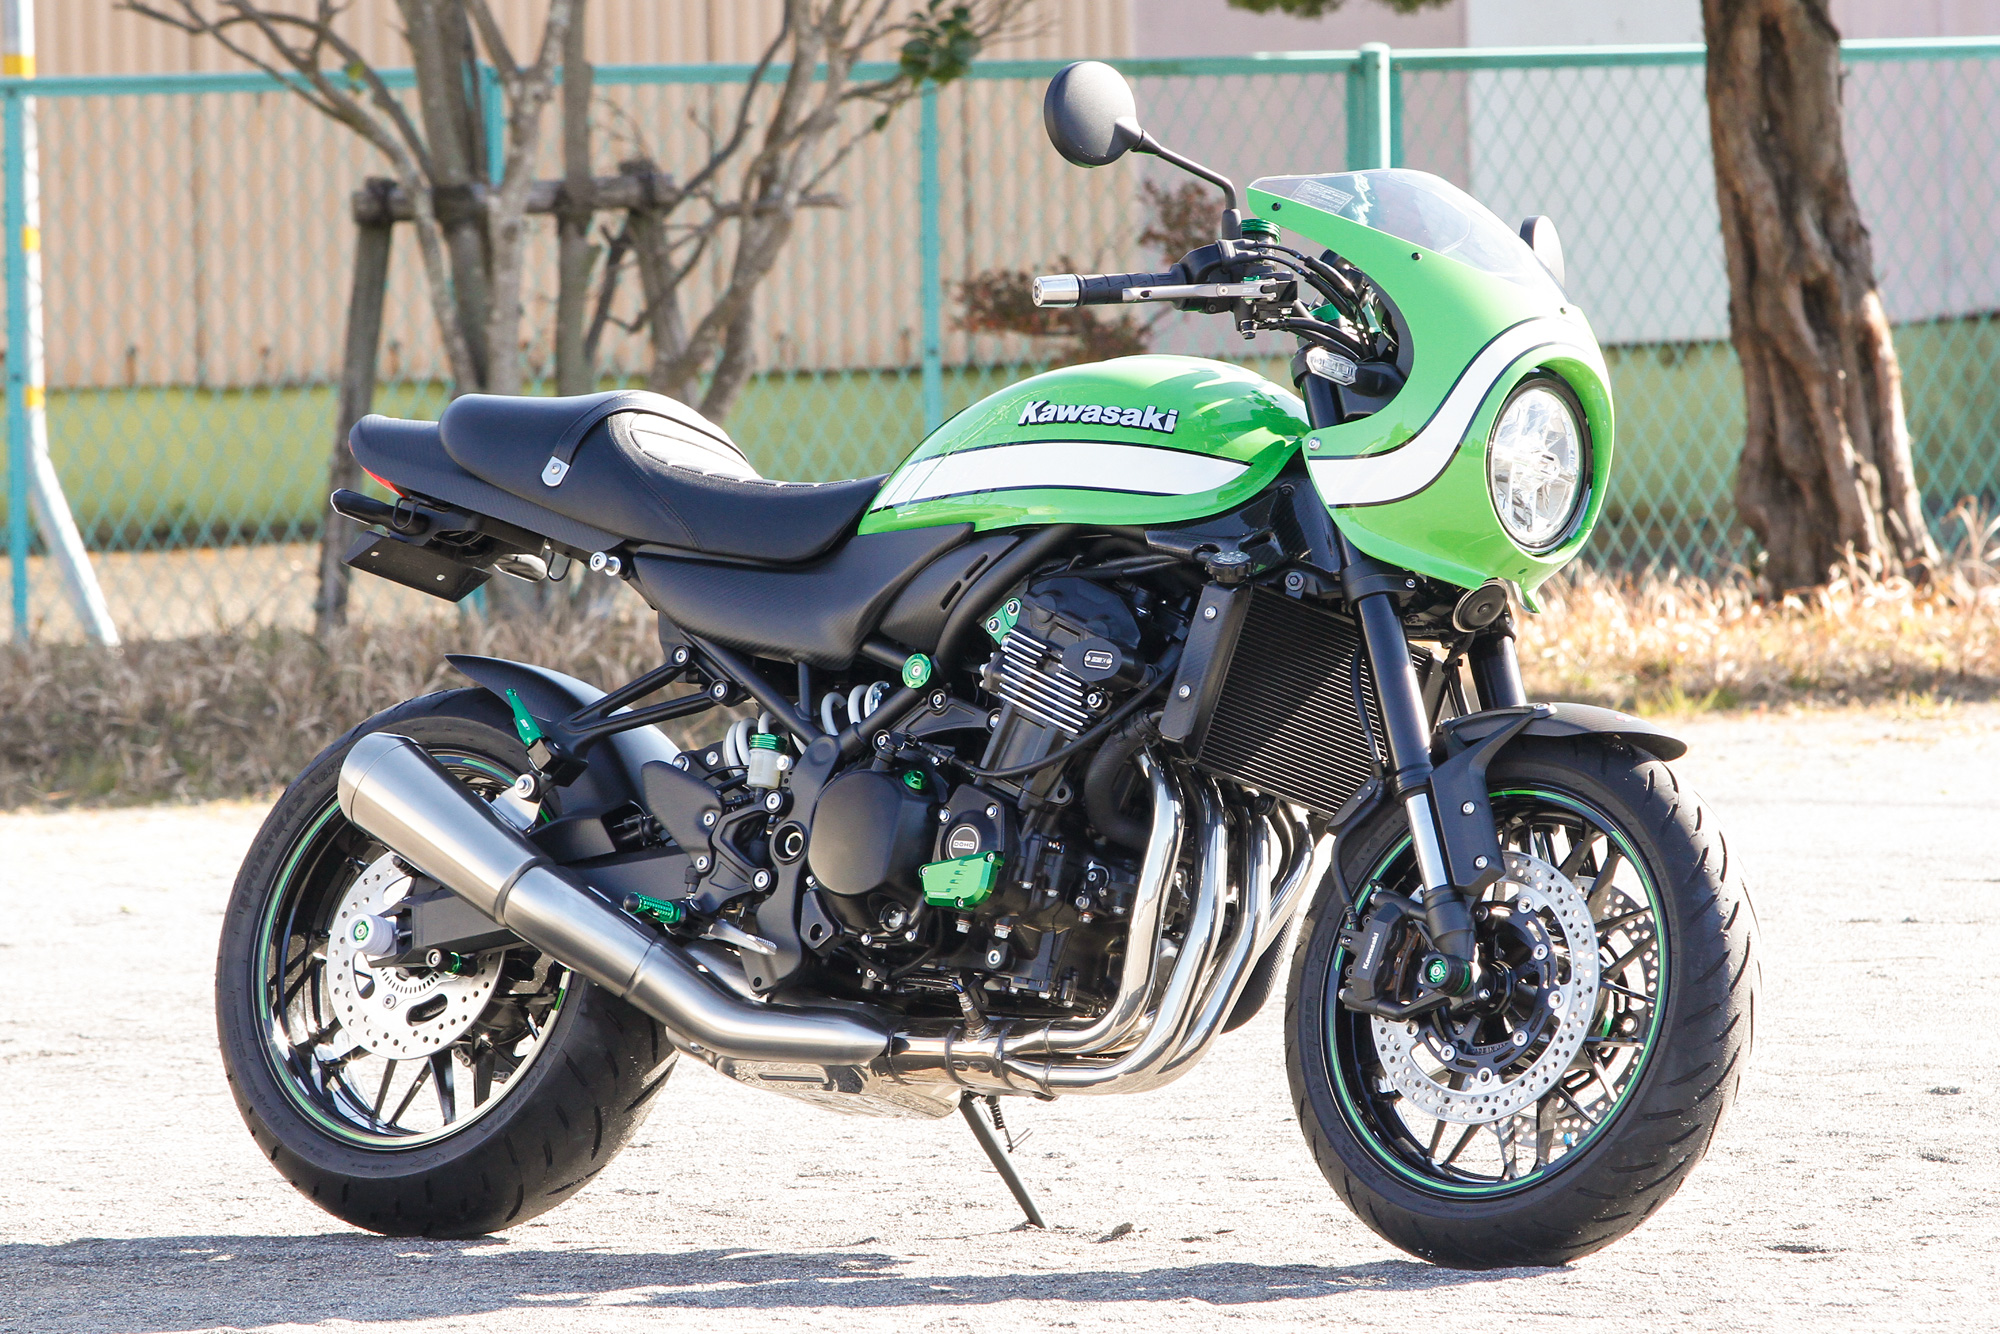 Z900RS/CAFE用 スピードラ カーボンパーツ by SSK | 製品紹介 | カワサキイチバン